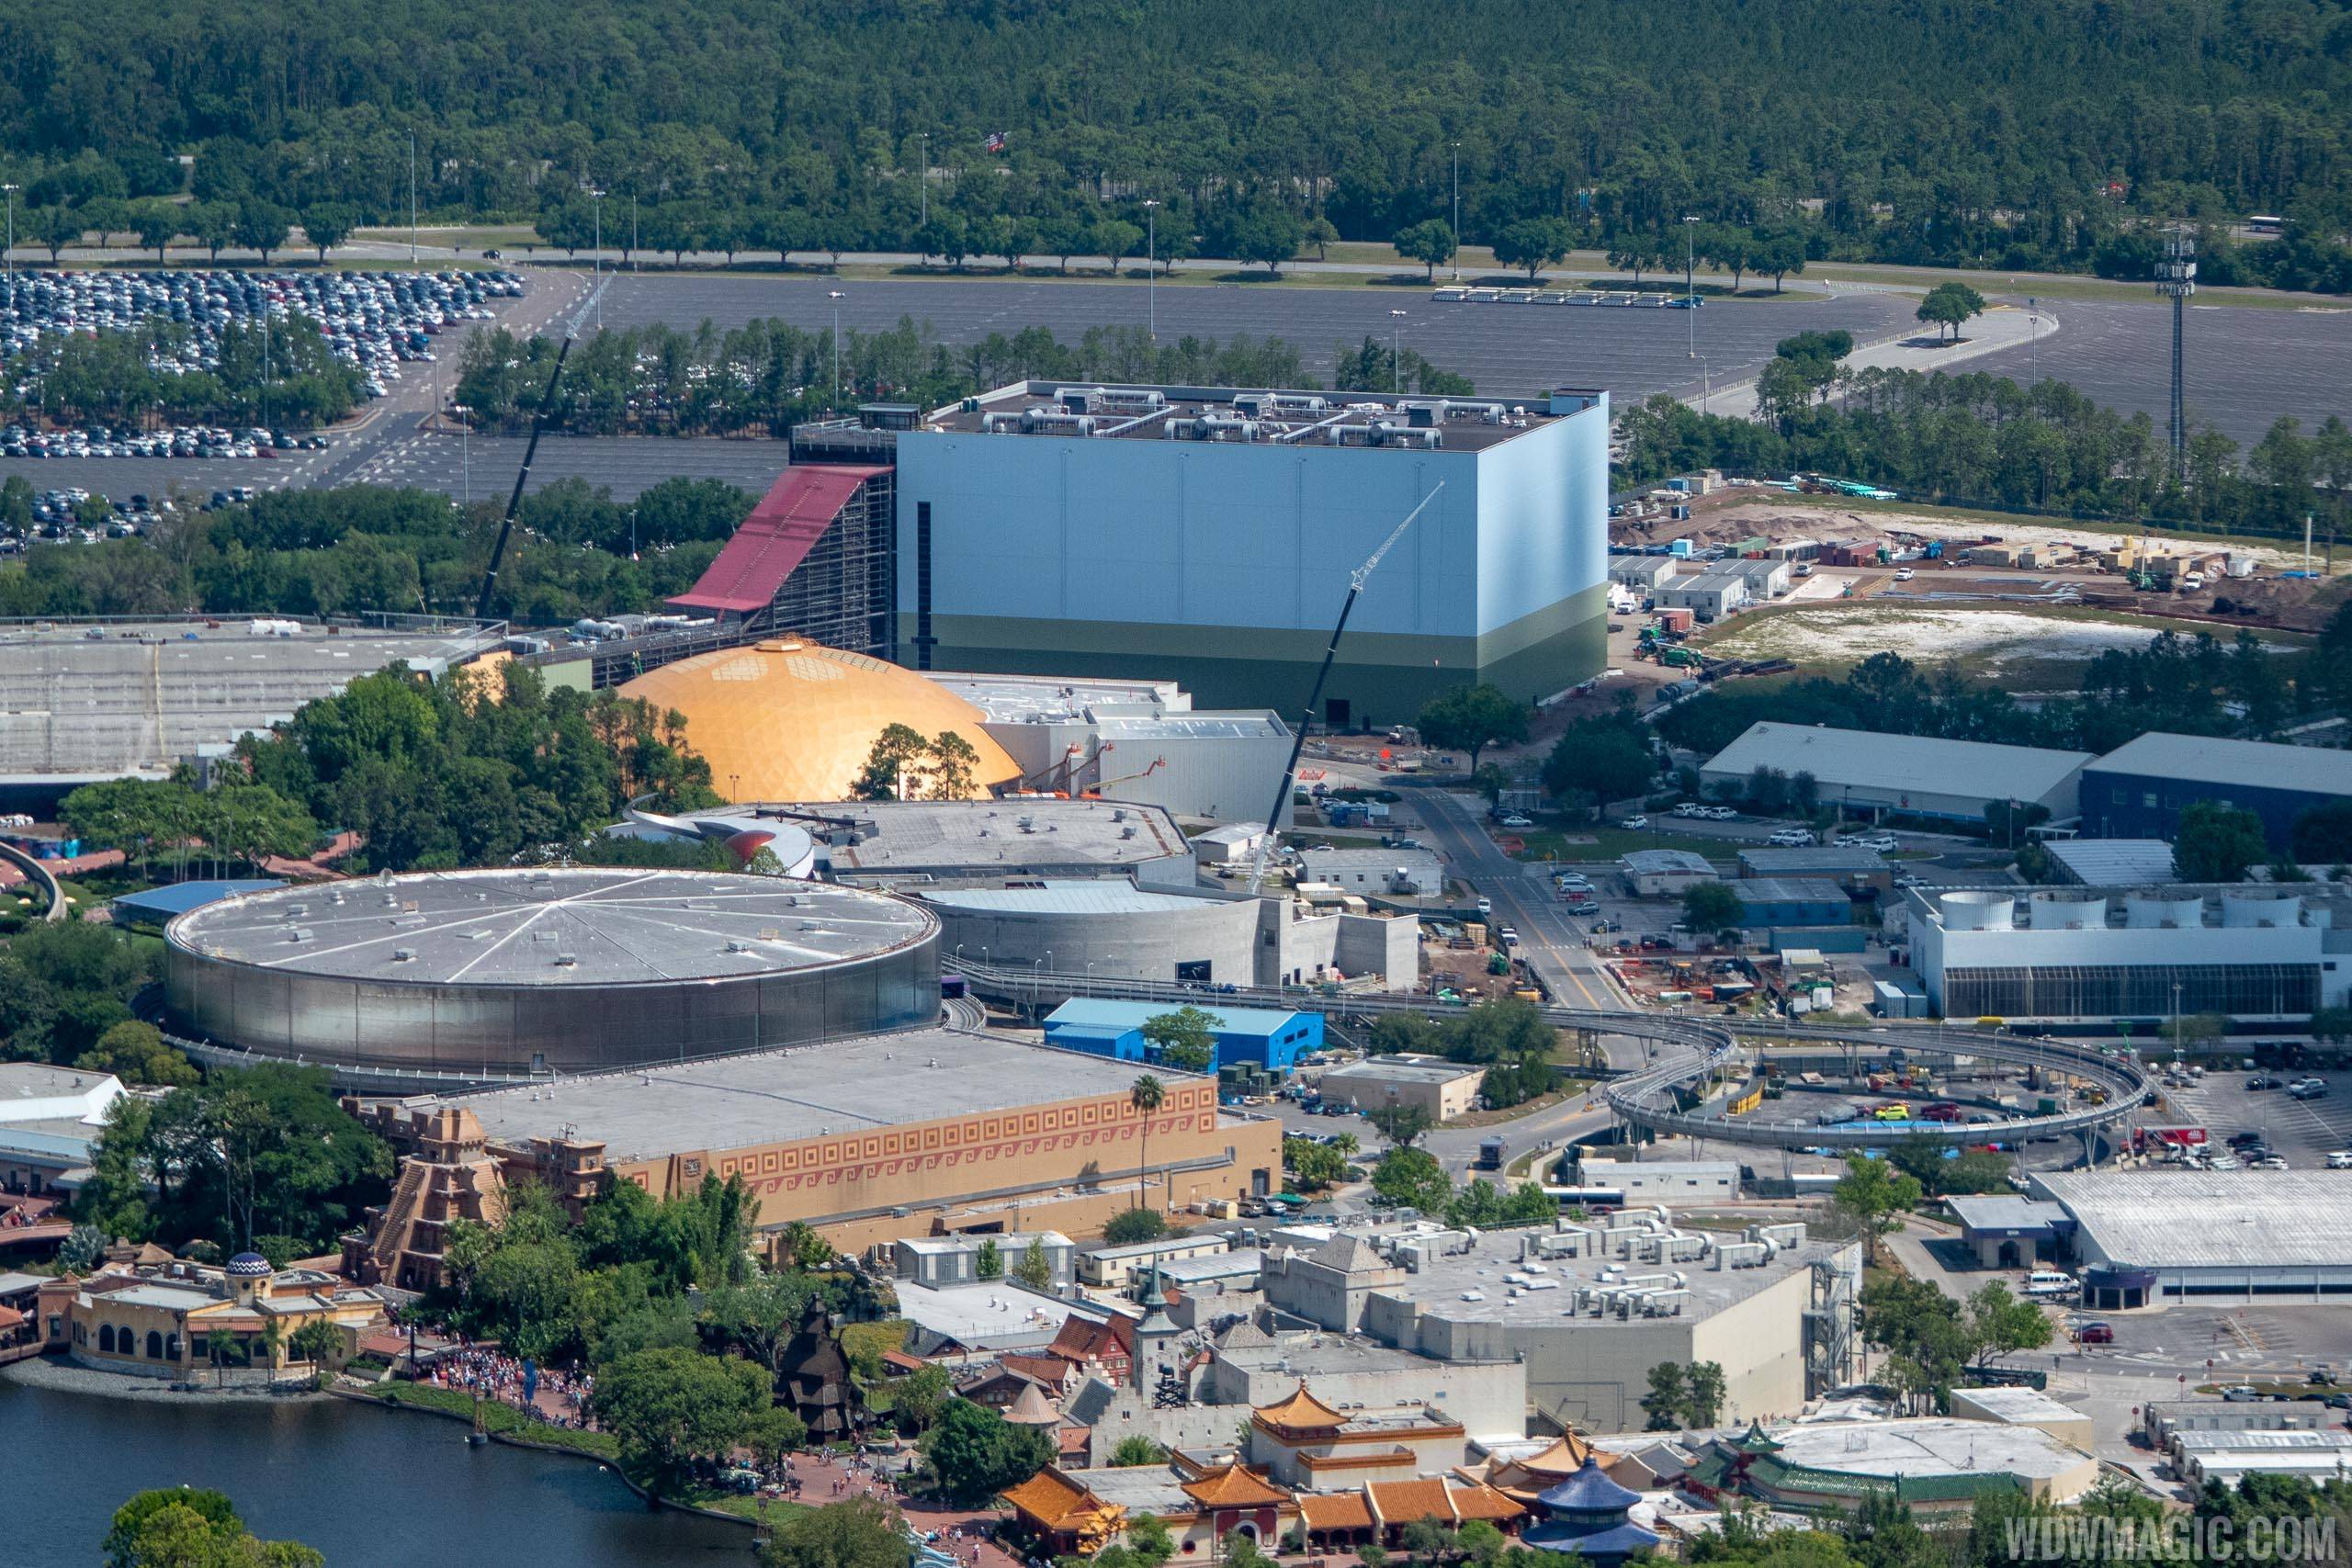 Guardians of the Galaxy construction - May 2019